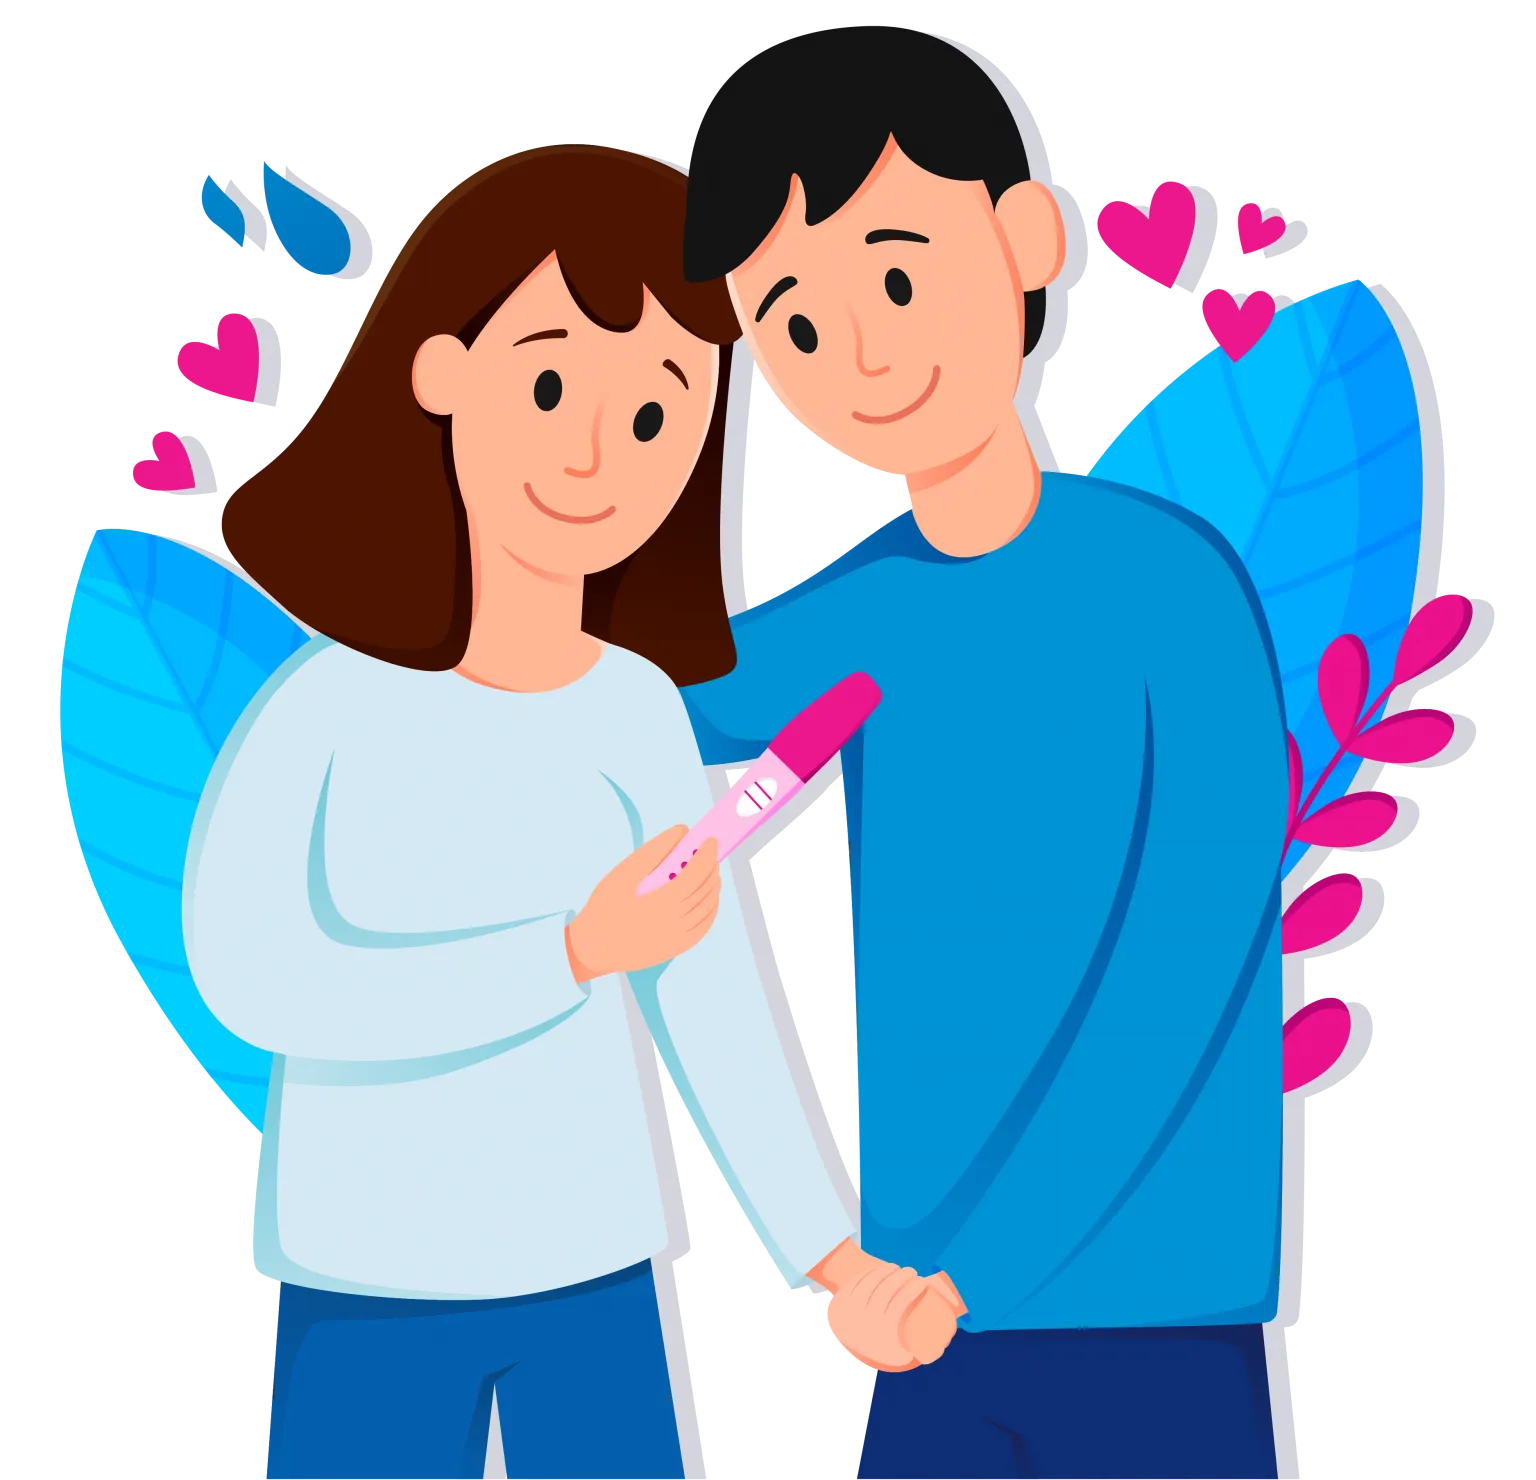 Illustration of couple holding hands looking at a pregnancy test